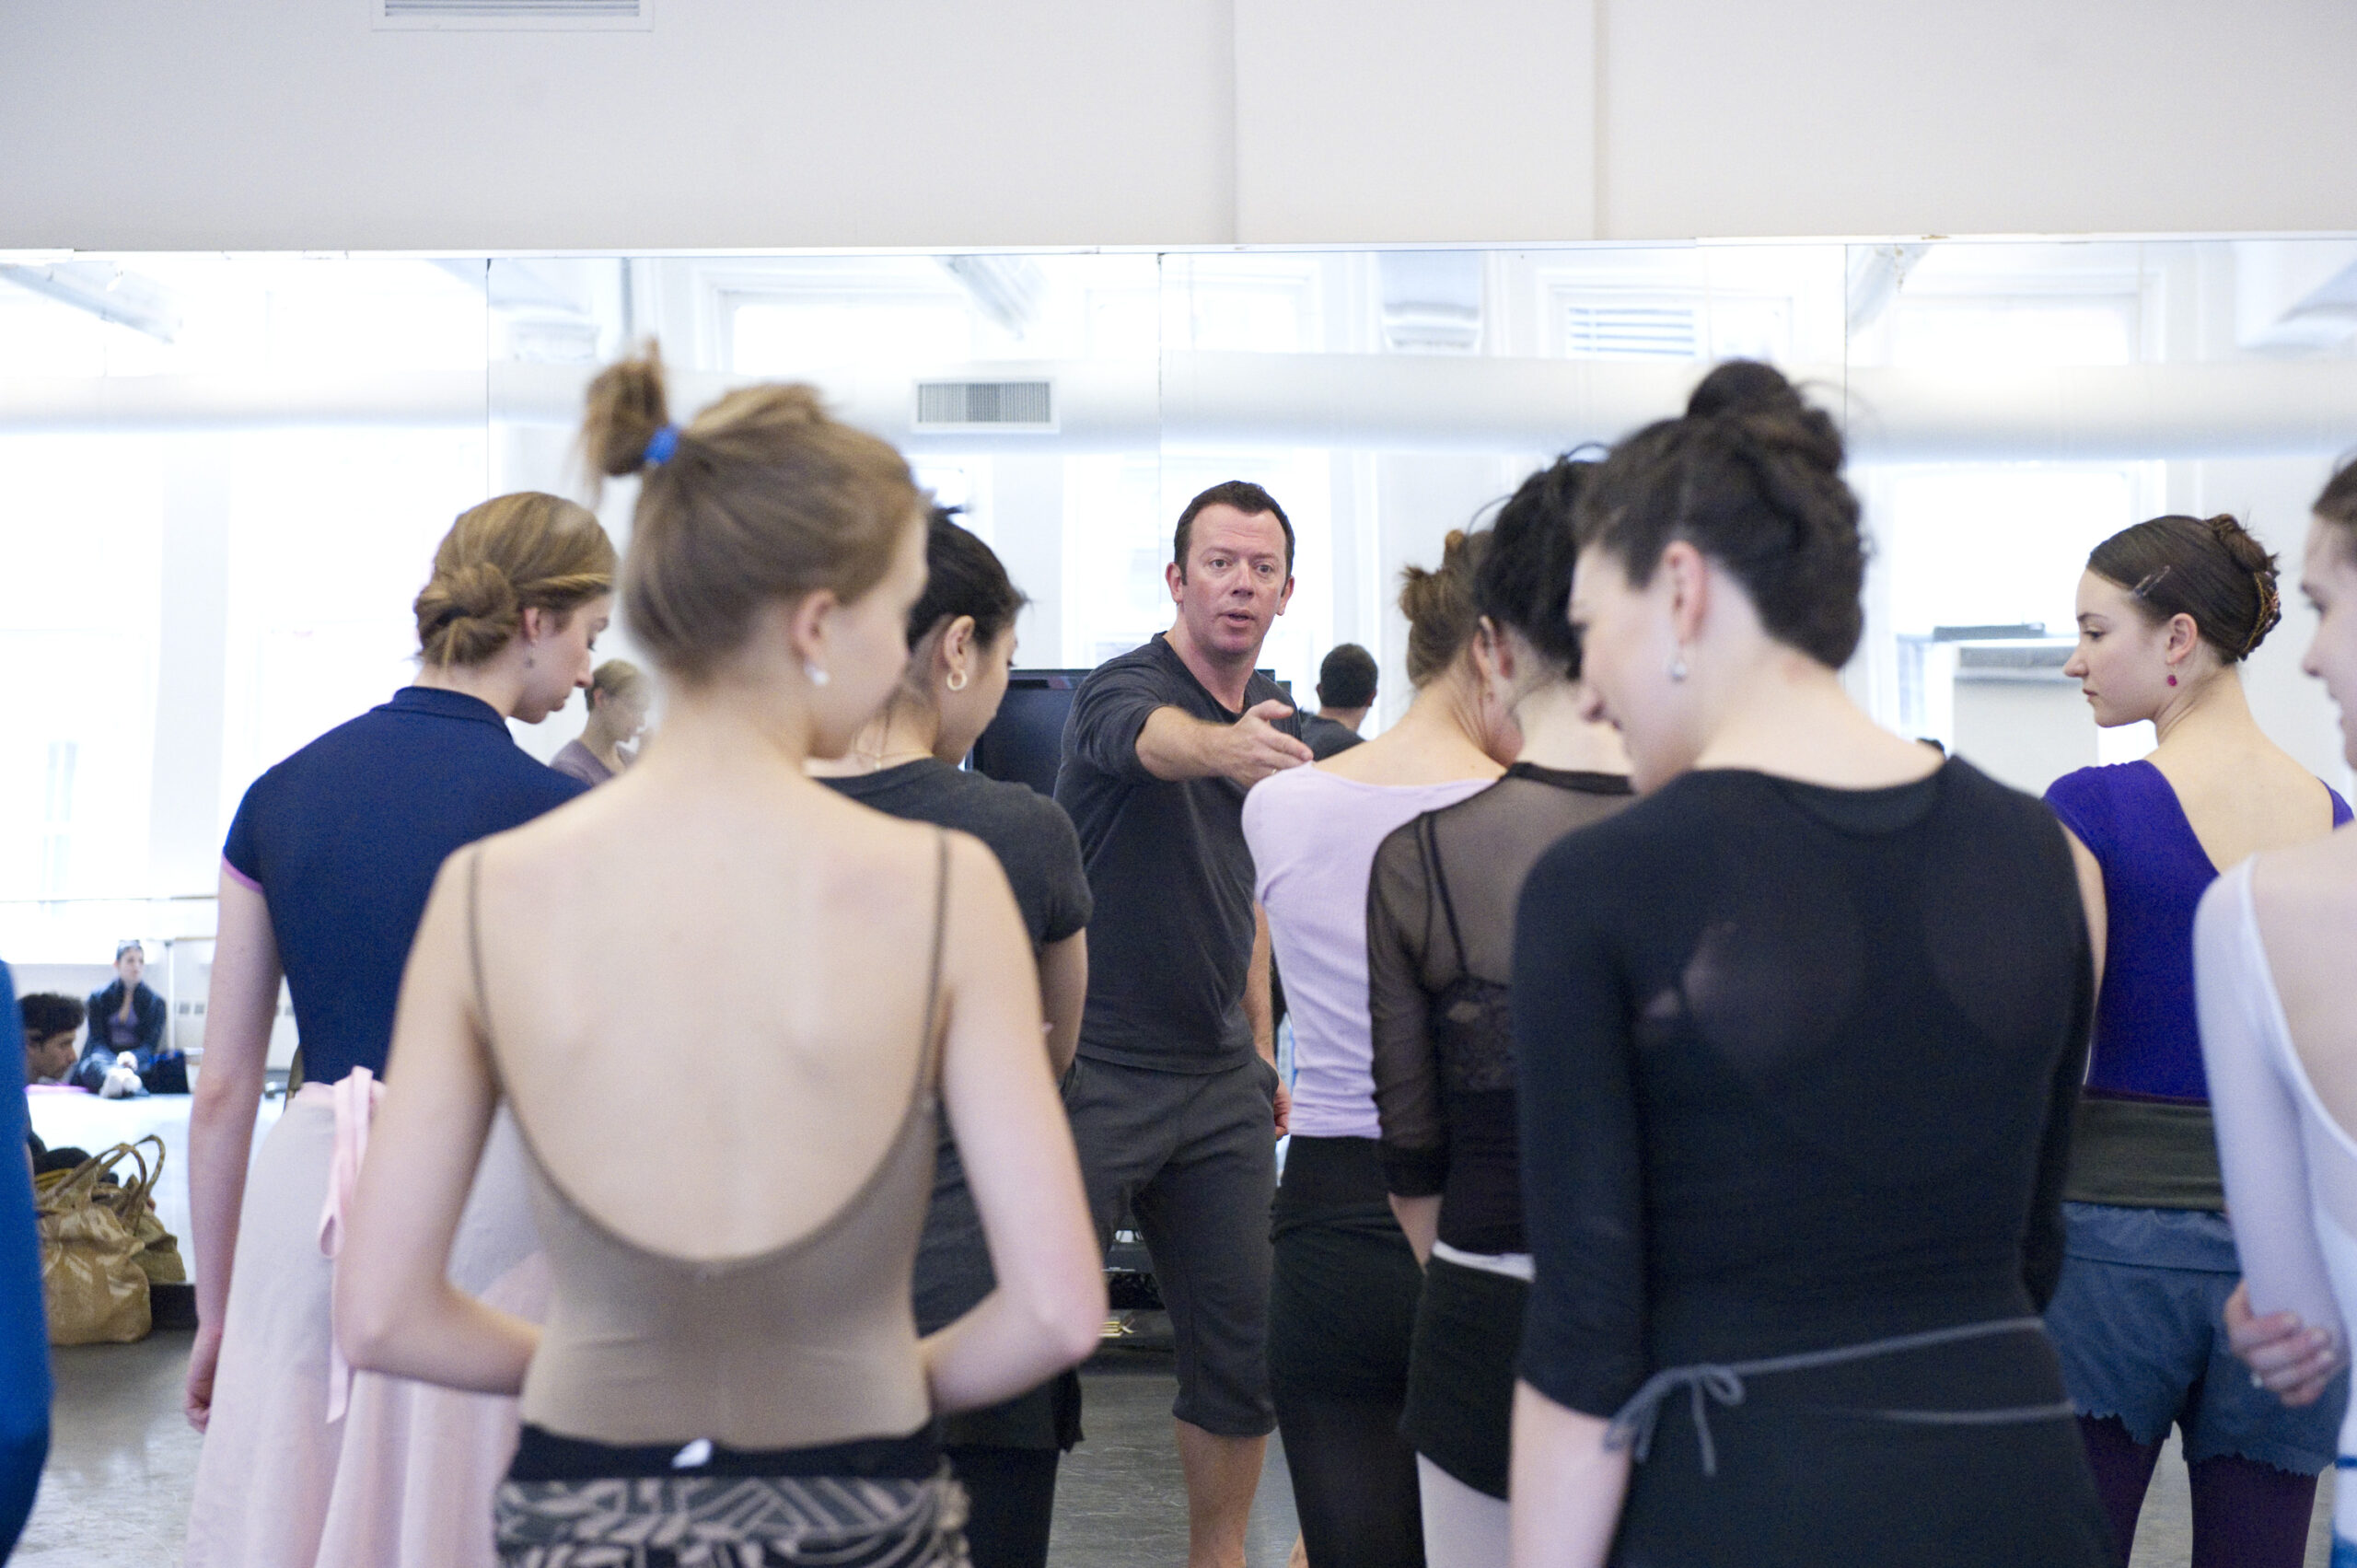 Alexei Ratmansky stands at the front of a mirrored studio, gesturing with one arm as he speaks. Two lines of women in rehearsal clothes stand between him and the camera, their backs to the viewer.